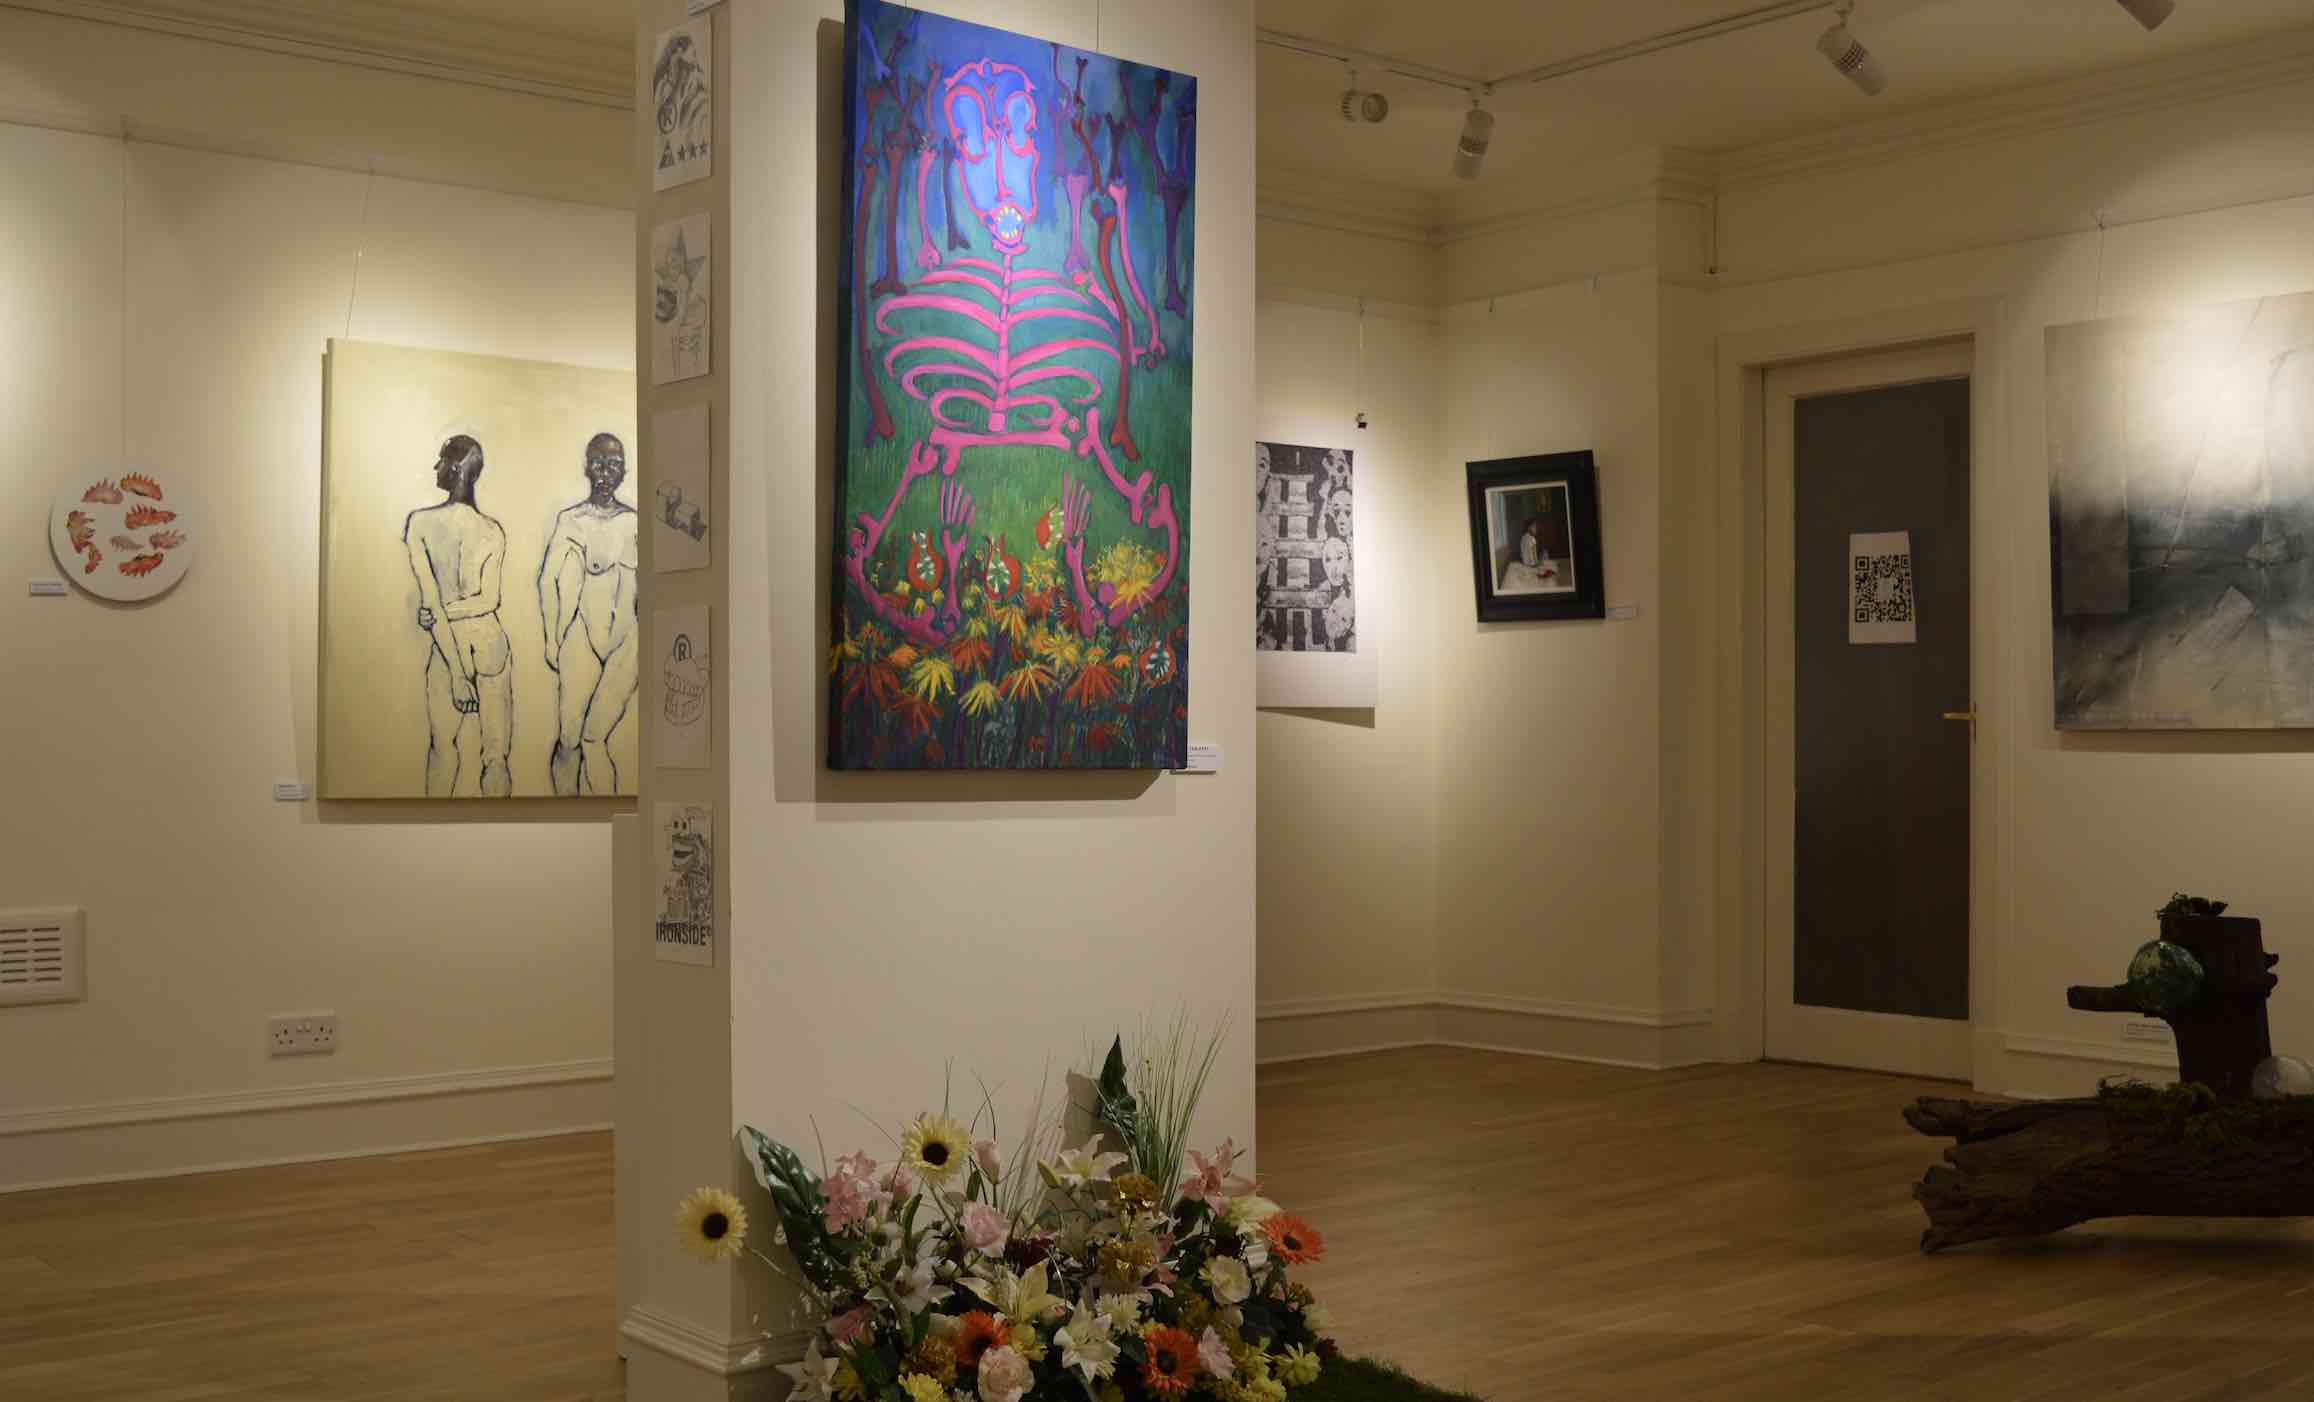 dimly lit Gallery,with spotlights on a column, and background walls covered with paintings, flowers on floor